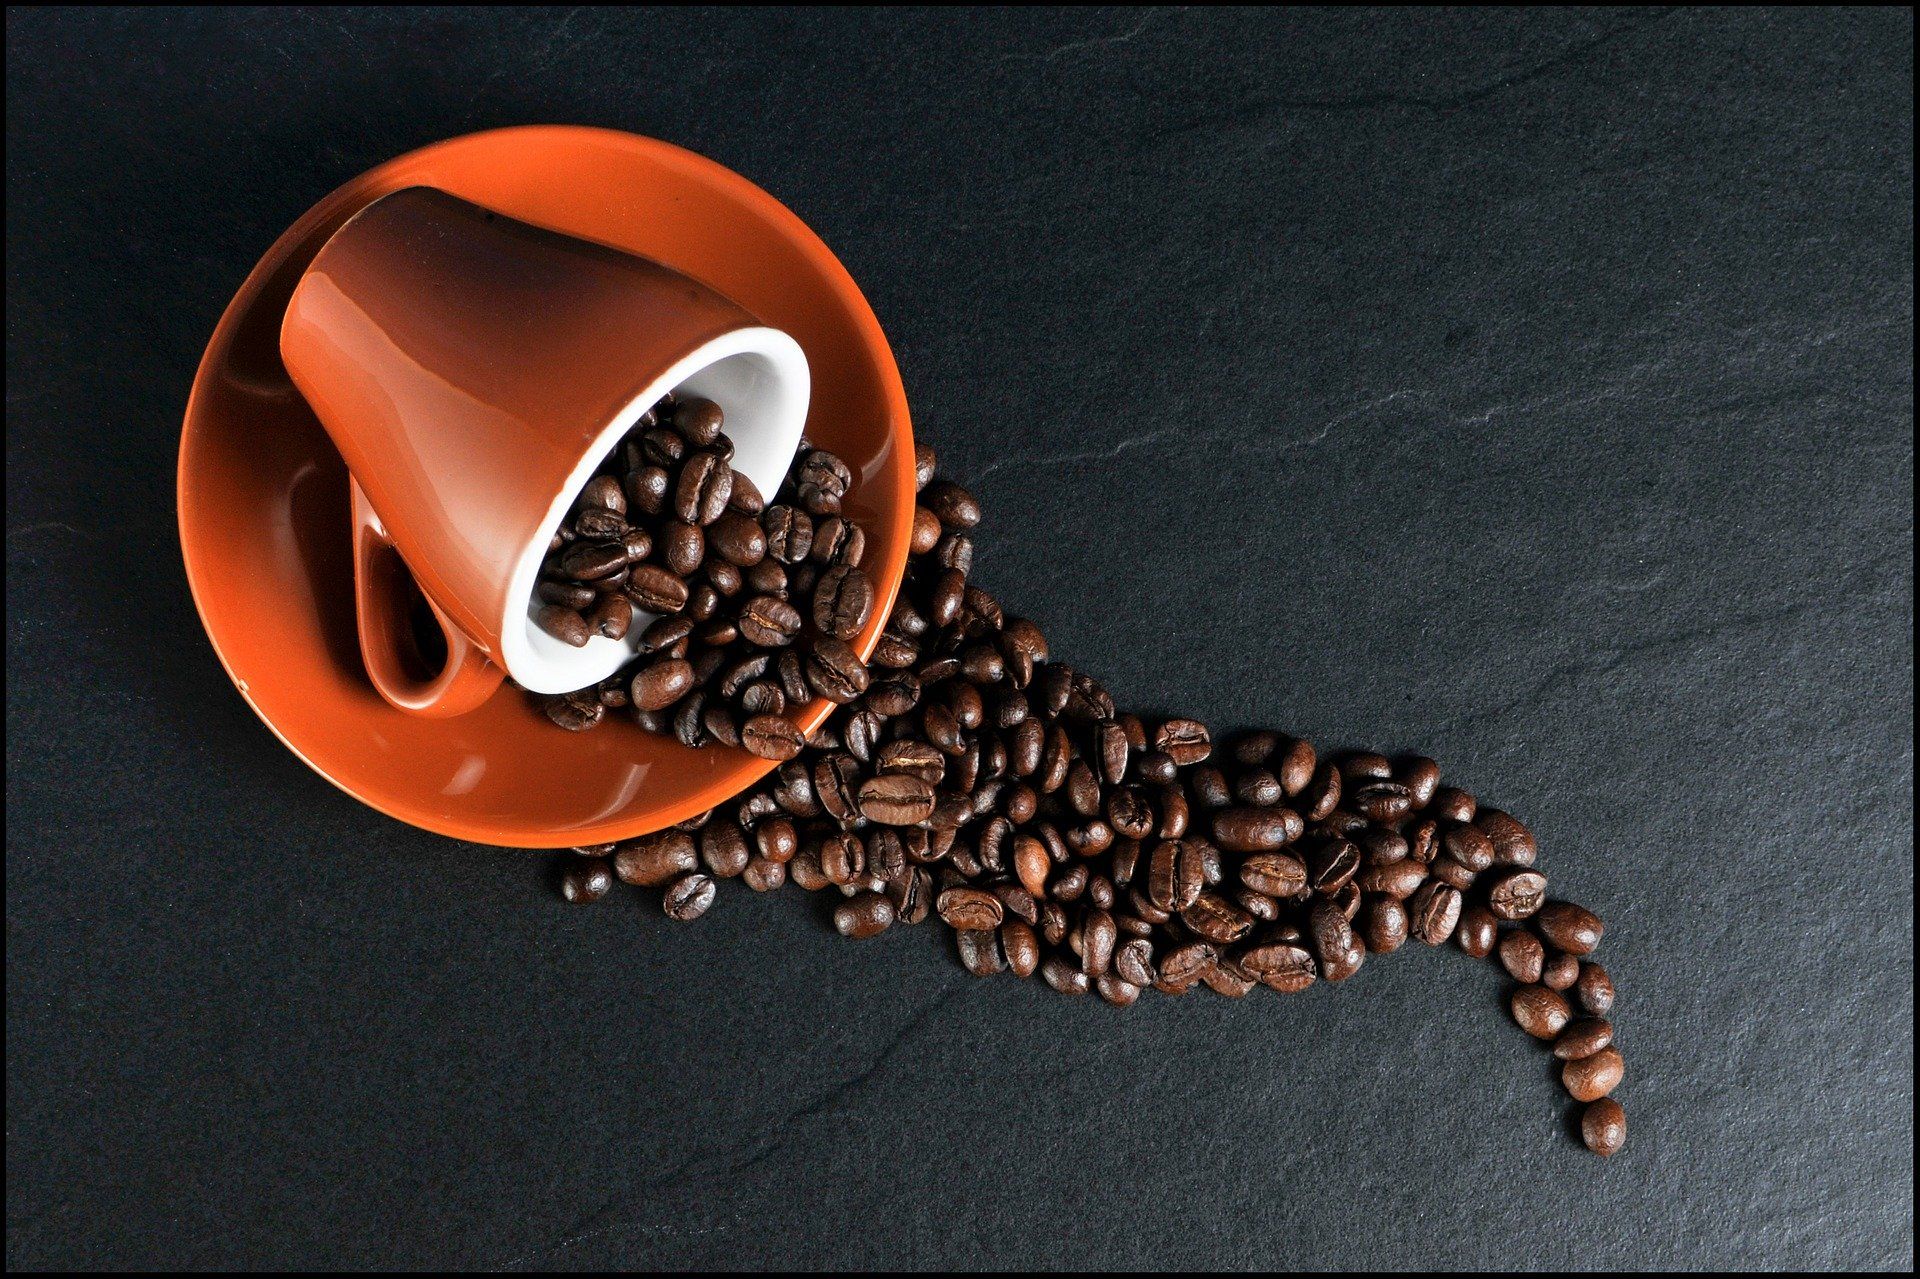 A spilled cup filled with coffee beans